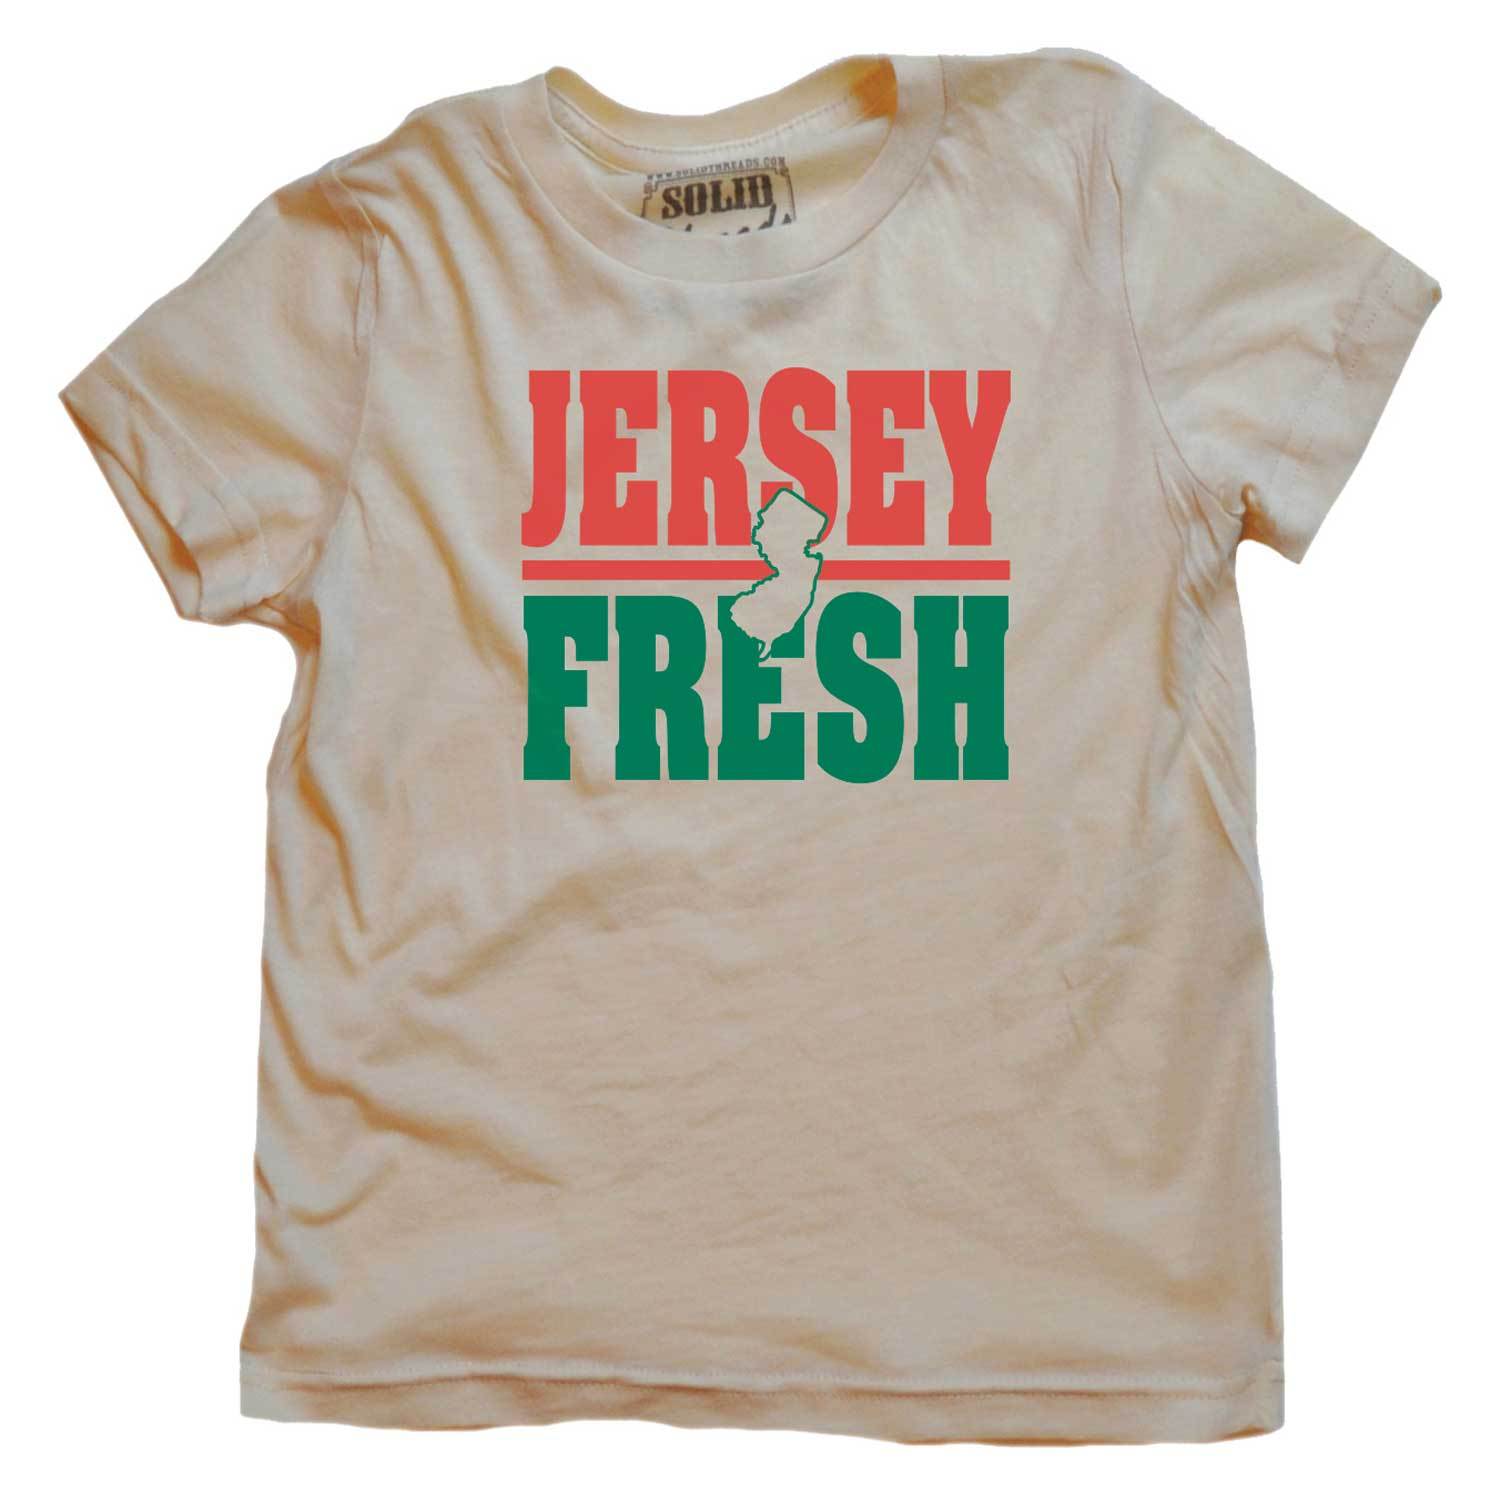 Kids New Jersey Fresh Vintage Graphic T-Shirt | Cute Funny Garden State Tee | Solid Threads